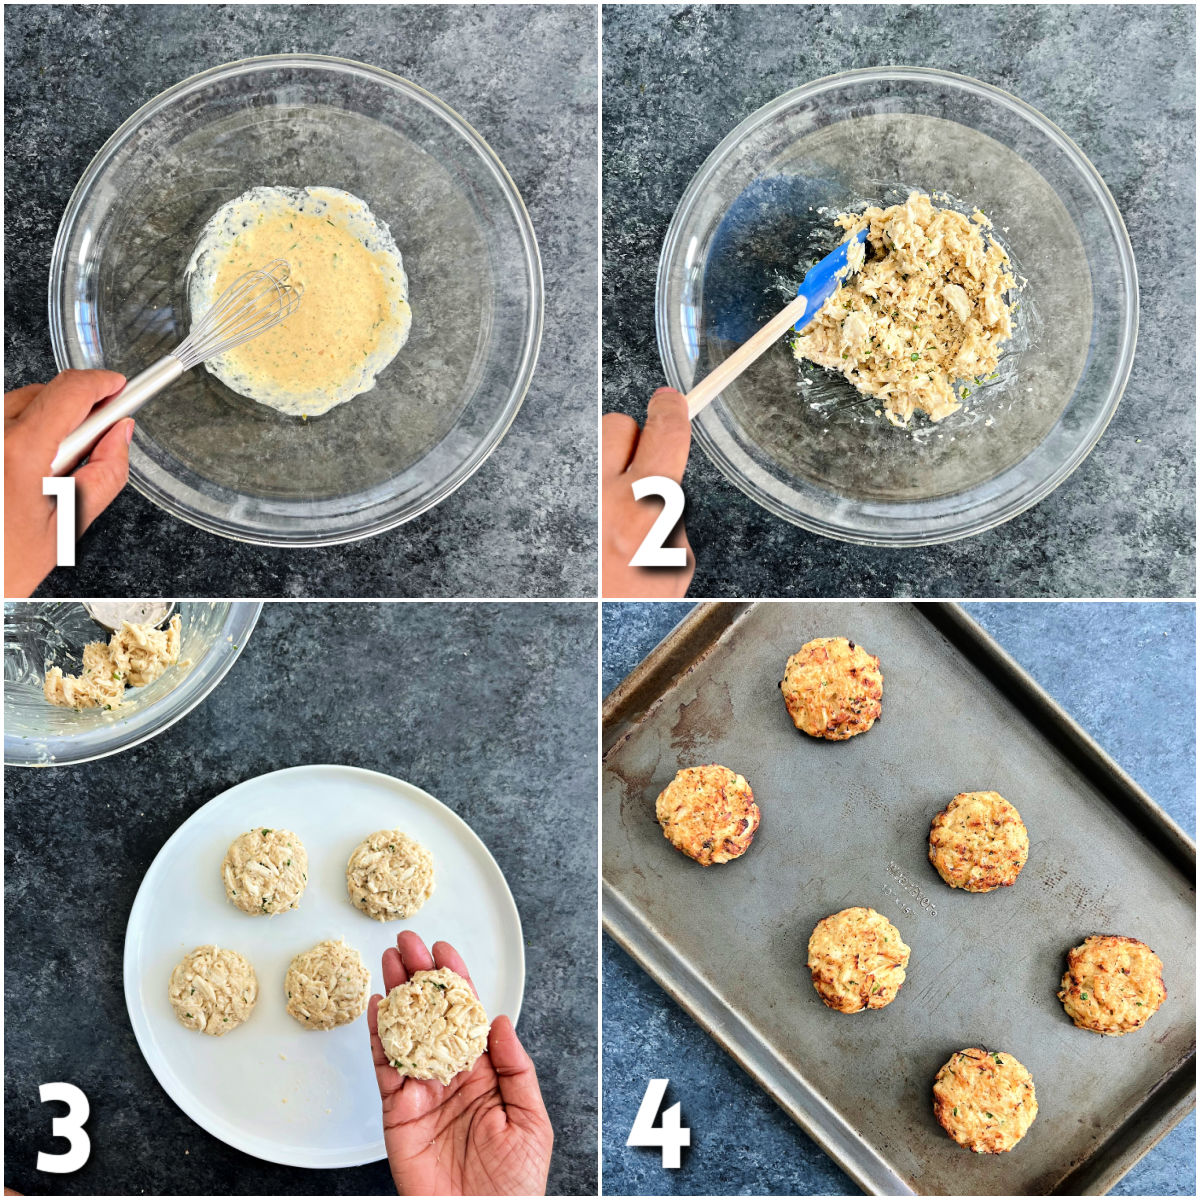 Steps for making Maryland-style Old Bay crab cakes.